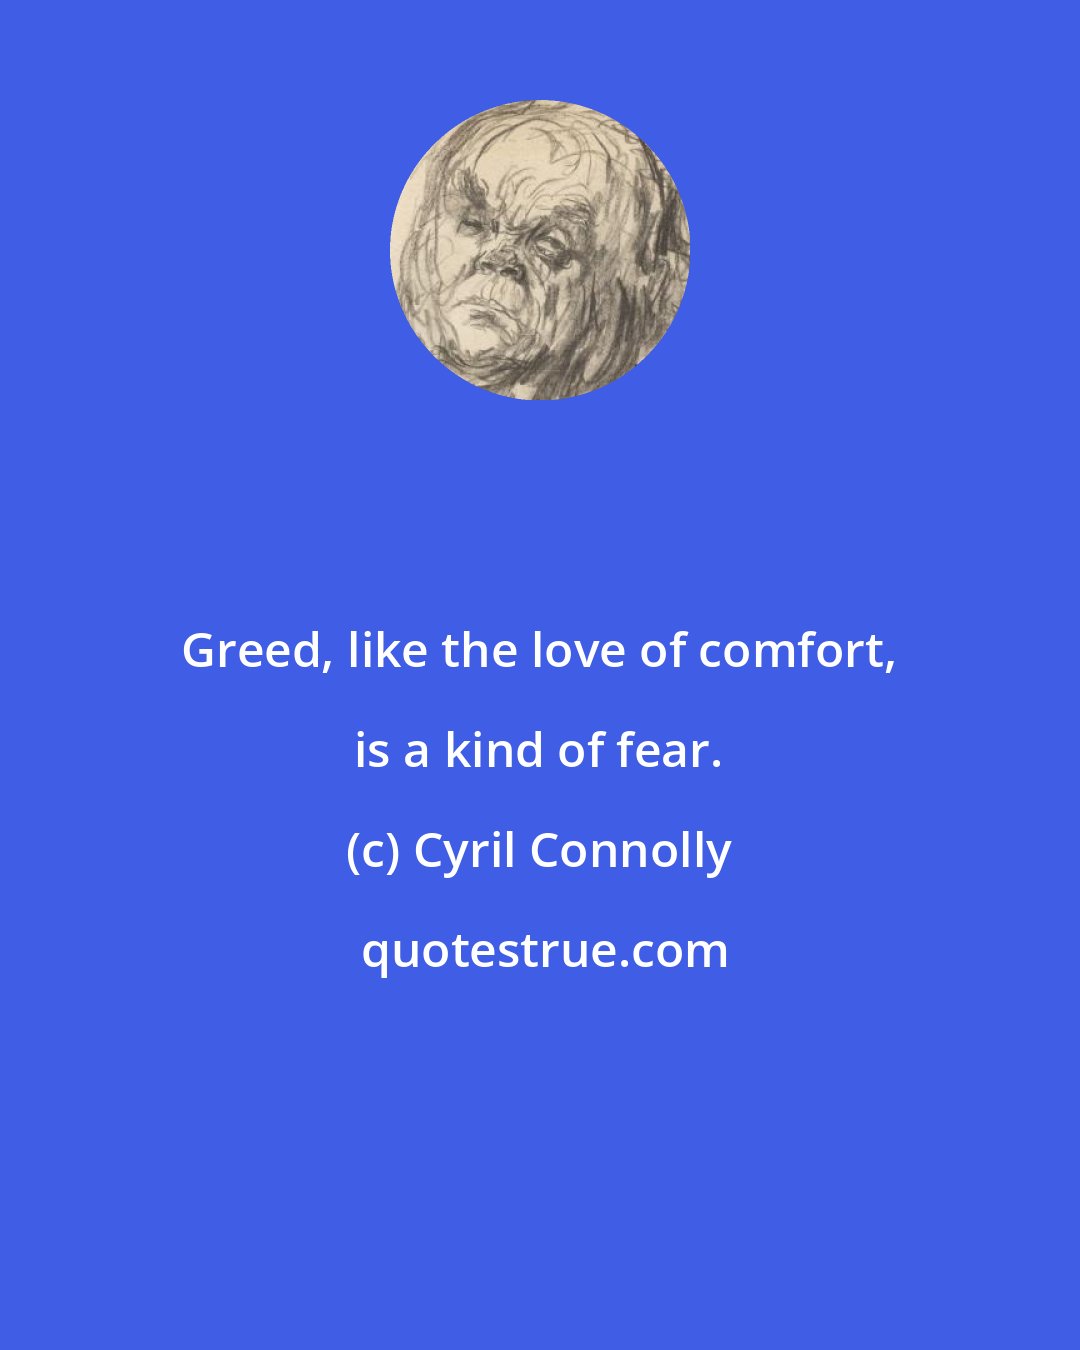 Cyril Connolly: Greed, like the love of comfort, is a kind of fear.